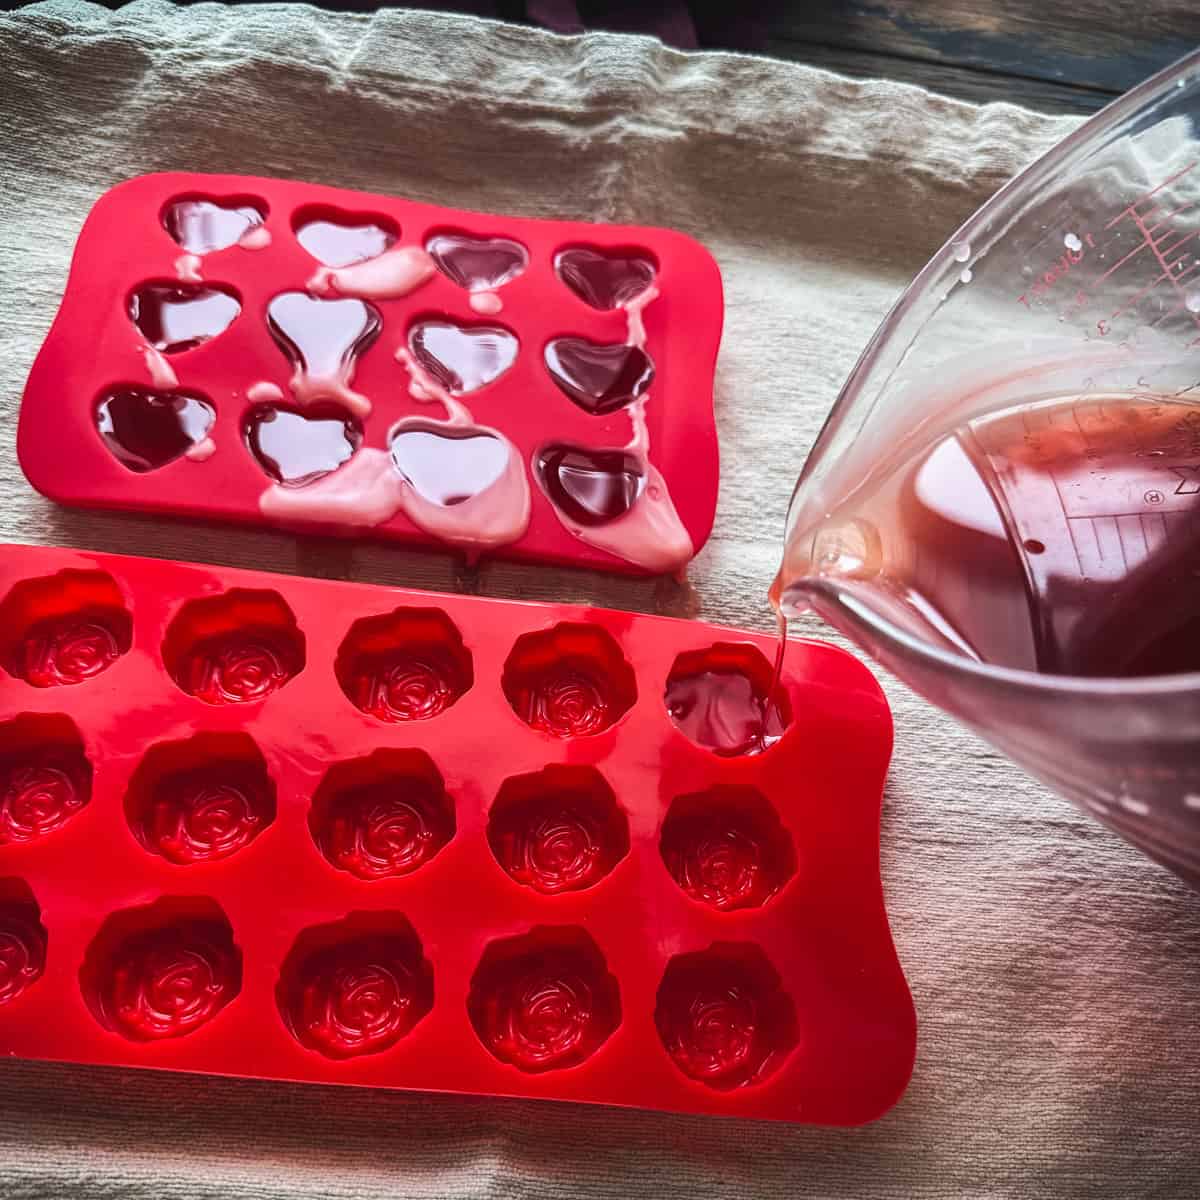 Rose infused oil melted mixture pouring into red heart shaped and flower shaped molds, sitting on a cloth.